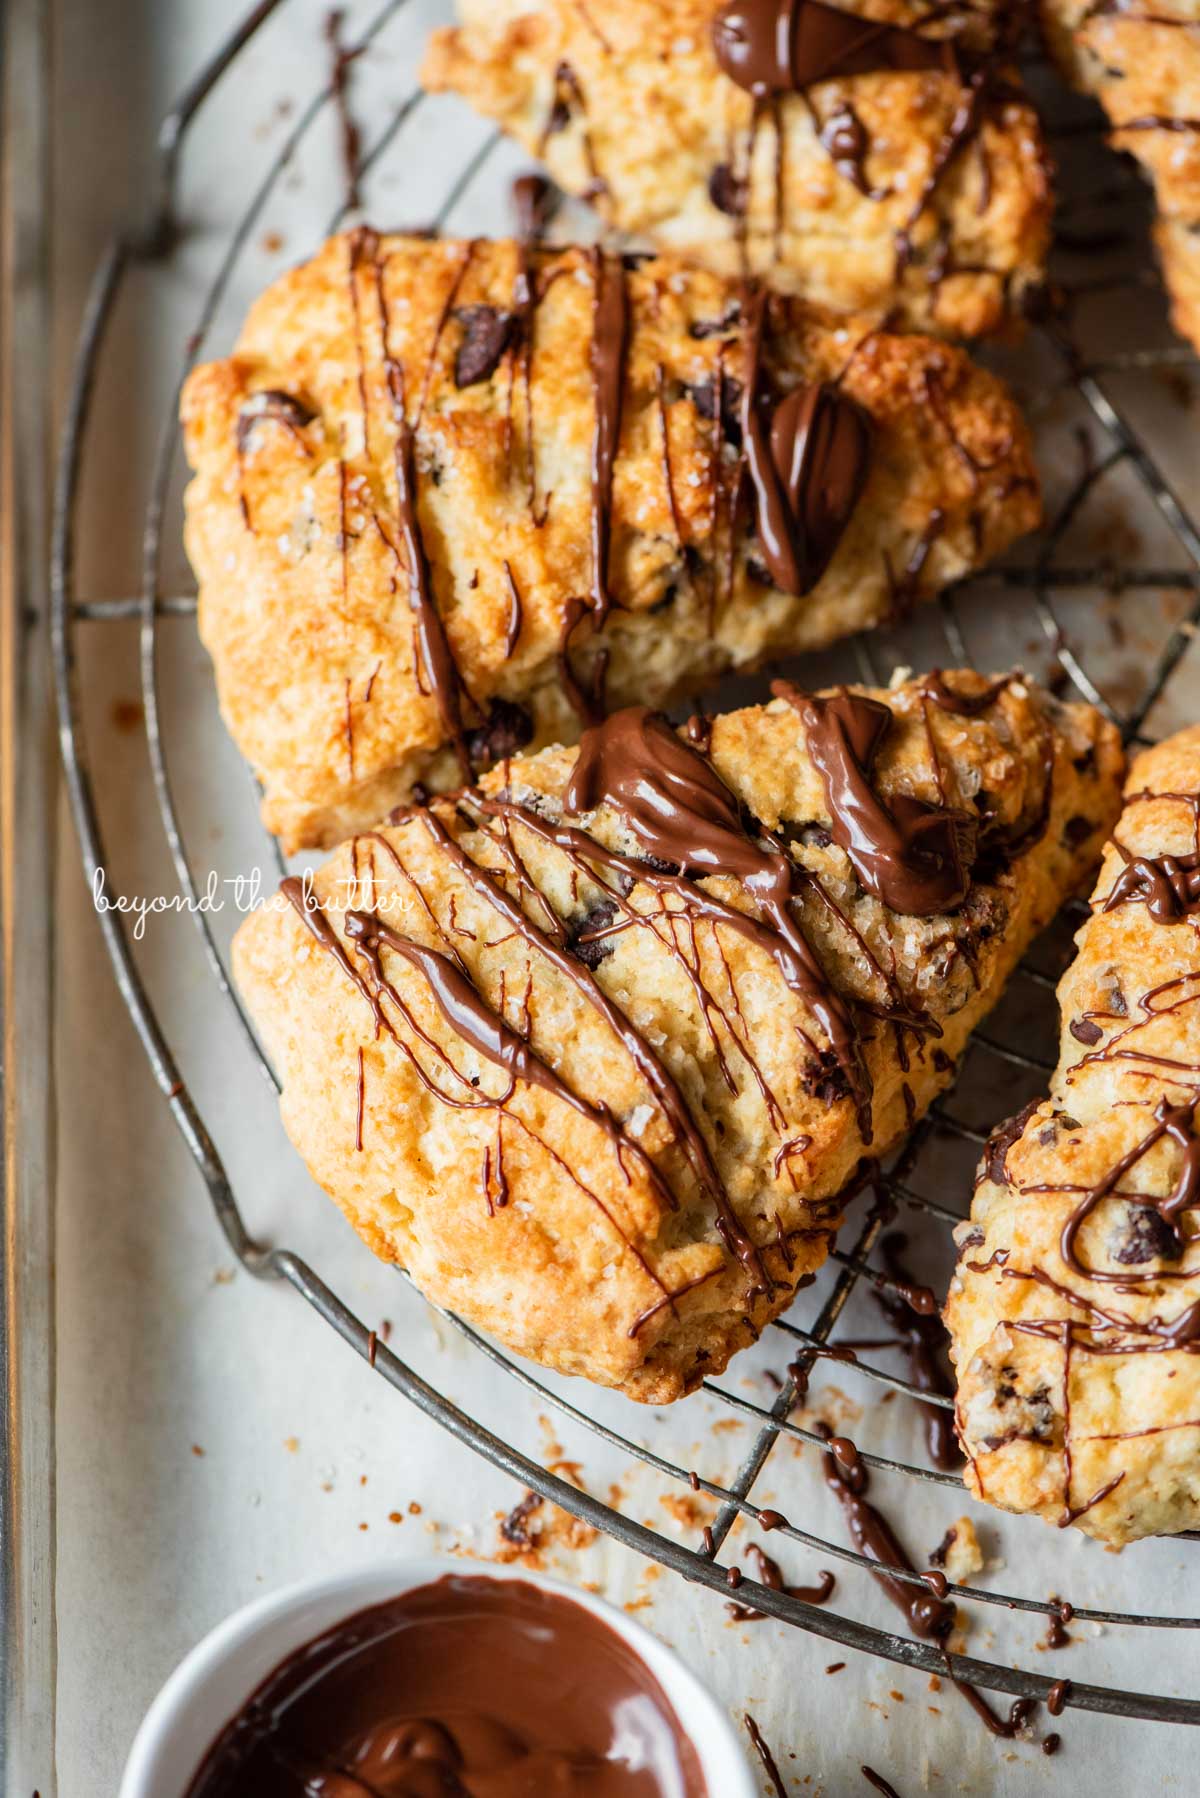 Chocolate chip scones drizzled with melted chocolate on a wire cooling rack.